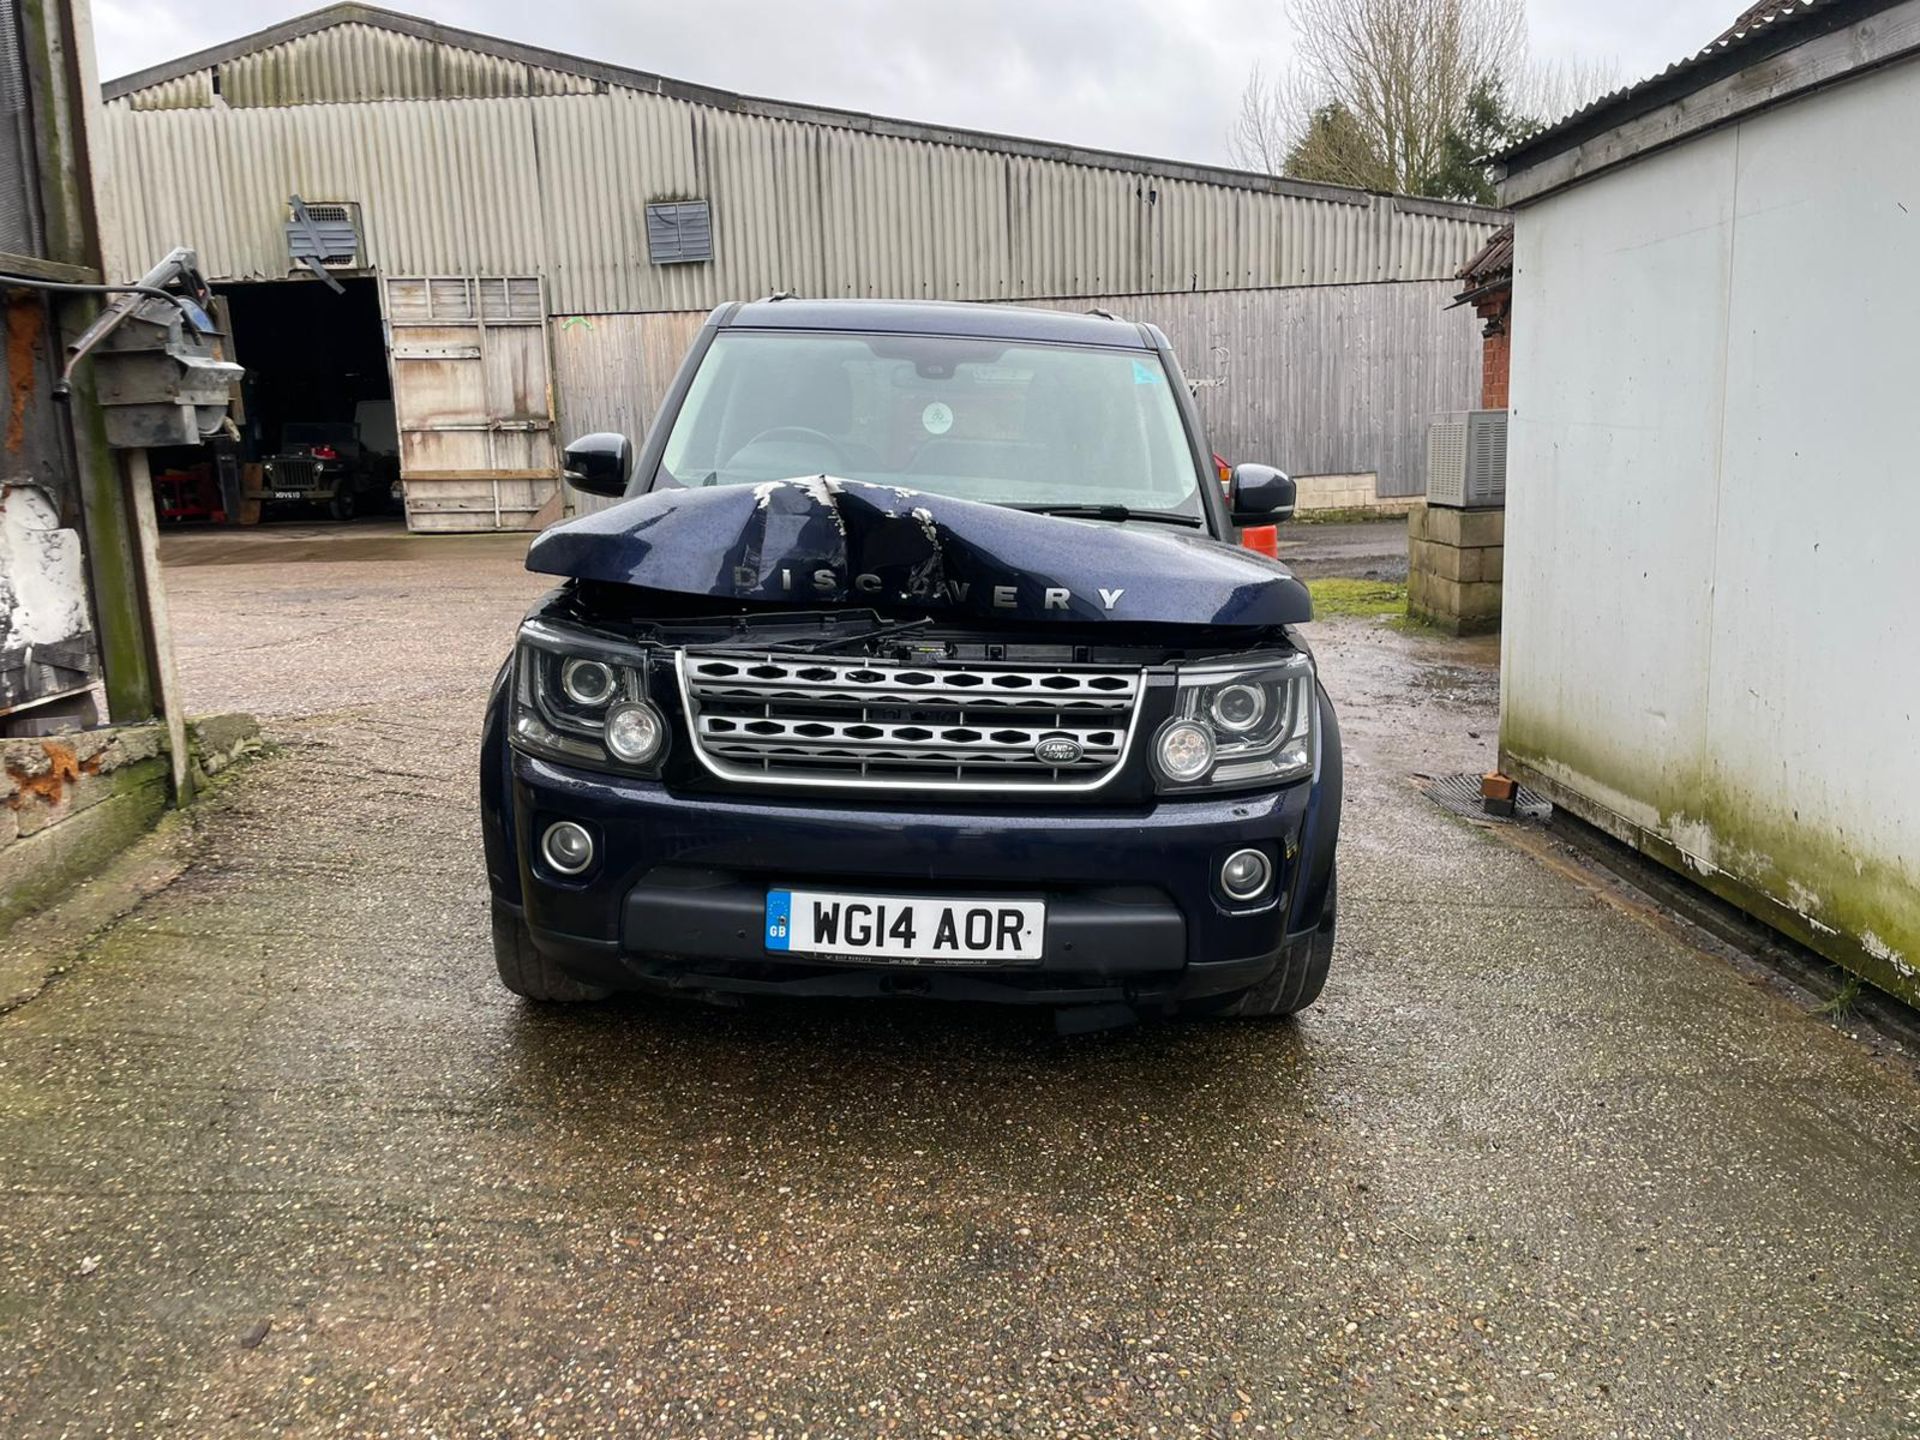 2014 LAND ROVER DISCOVERY XS SDV6 AUTO CAR DERIVED VAN - NON RUNNER PROJECT WITH PARTS *PLUS VAT* - Bild 2 aus 13